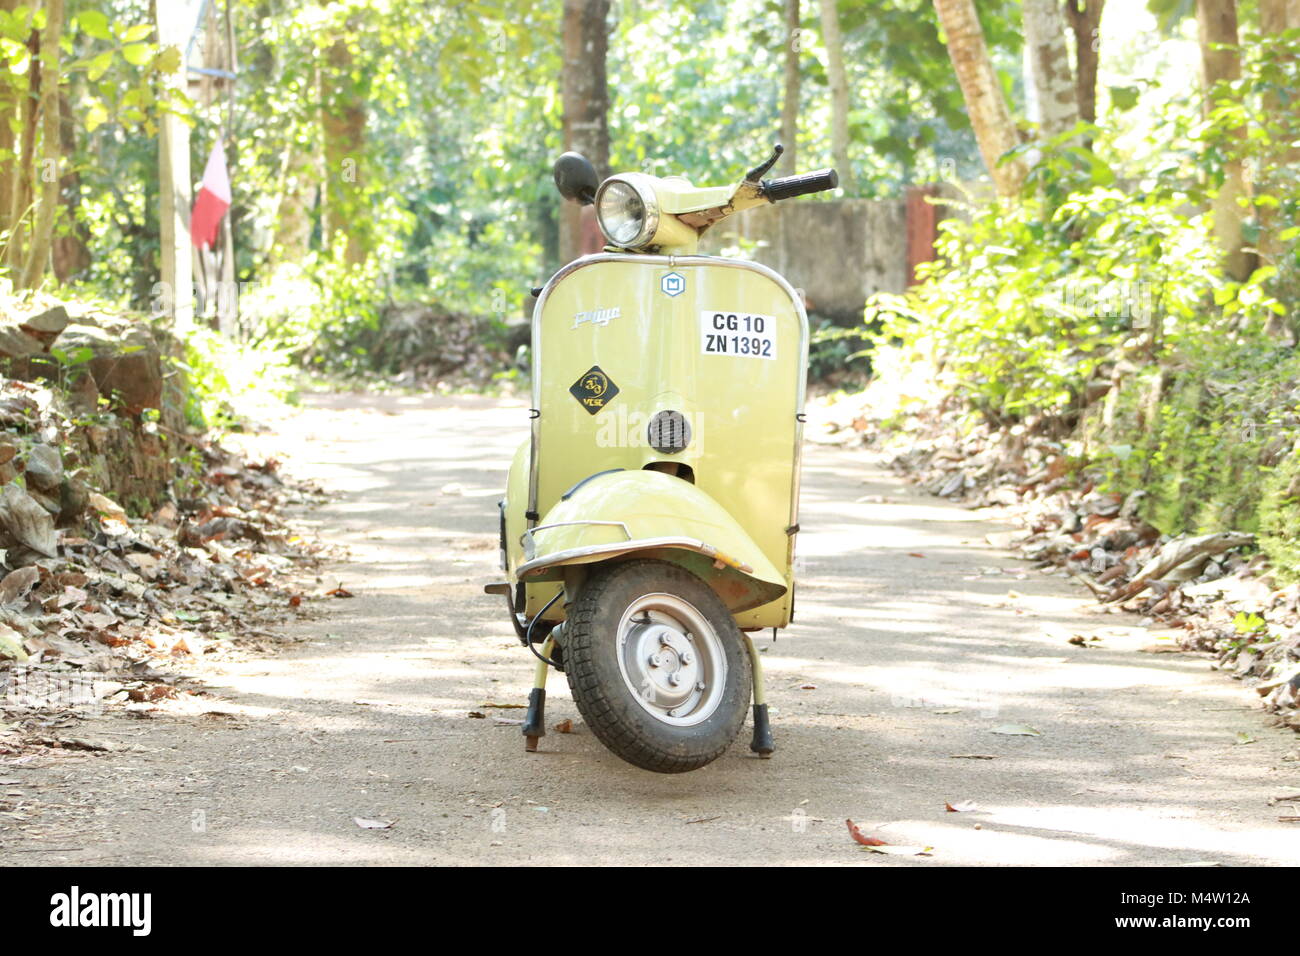 Bajaj Scooter High Resolution Stock Photography And Images Alamy